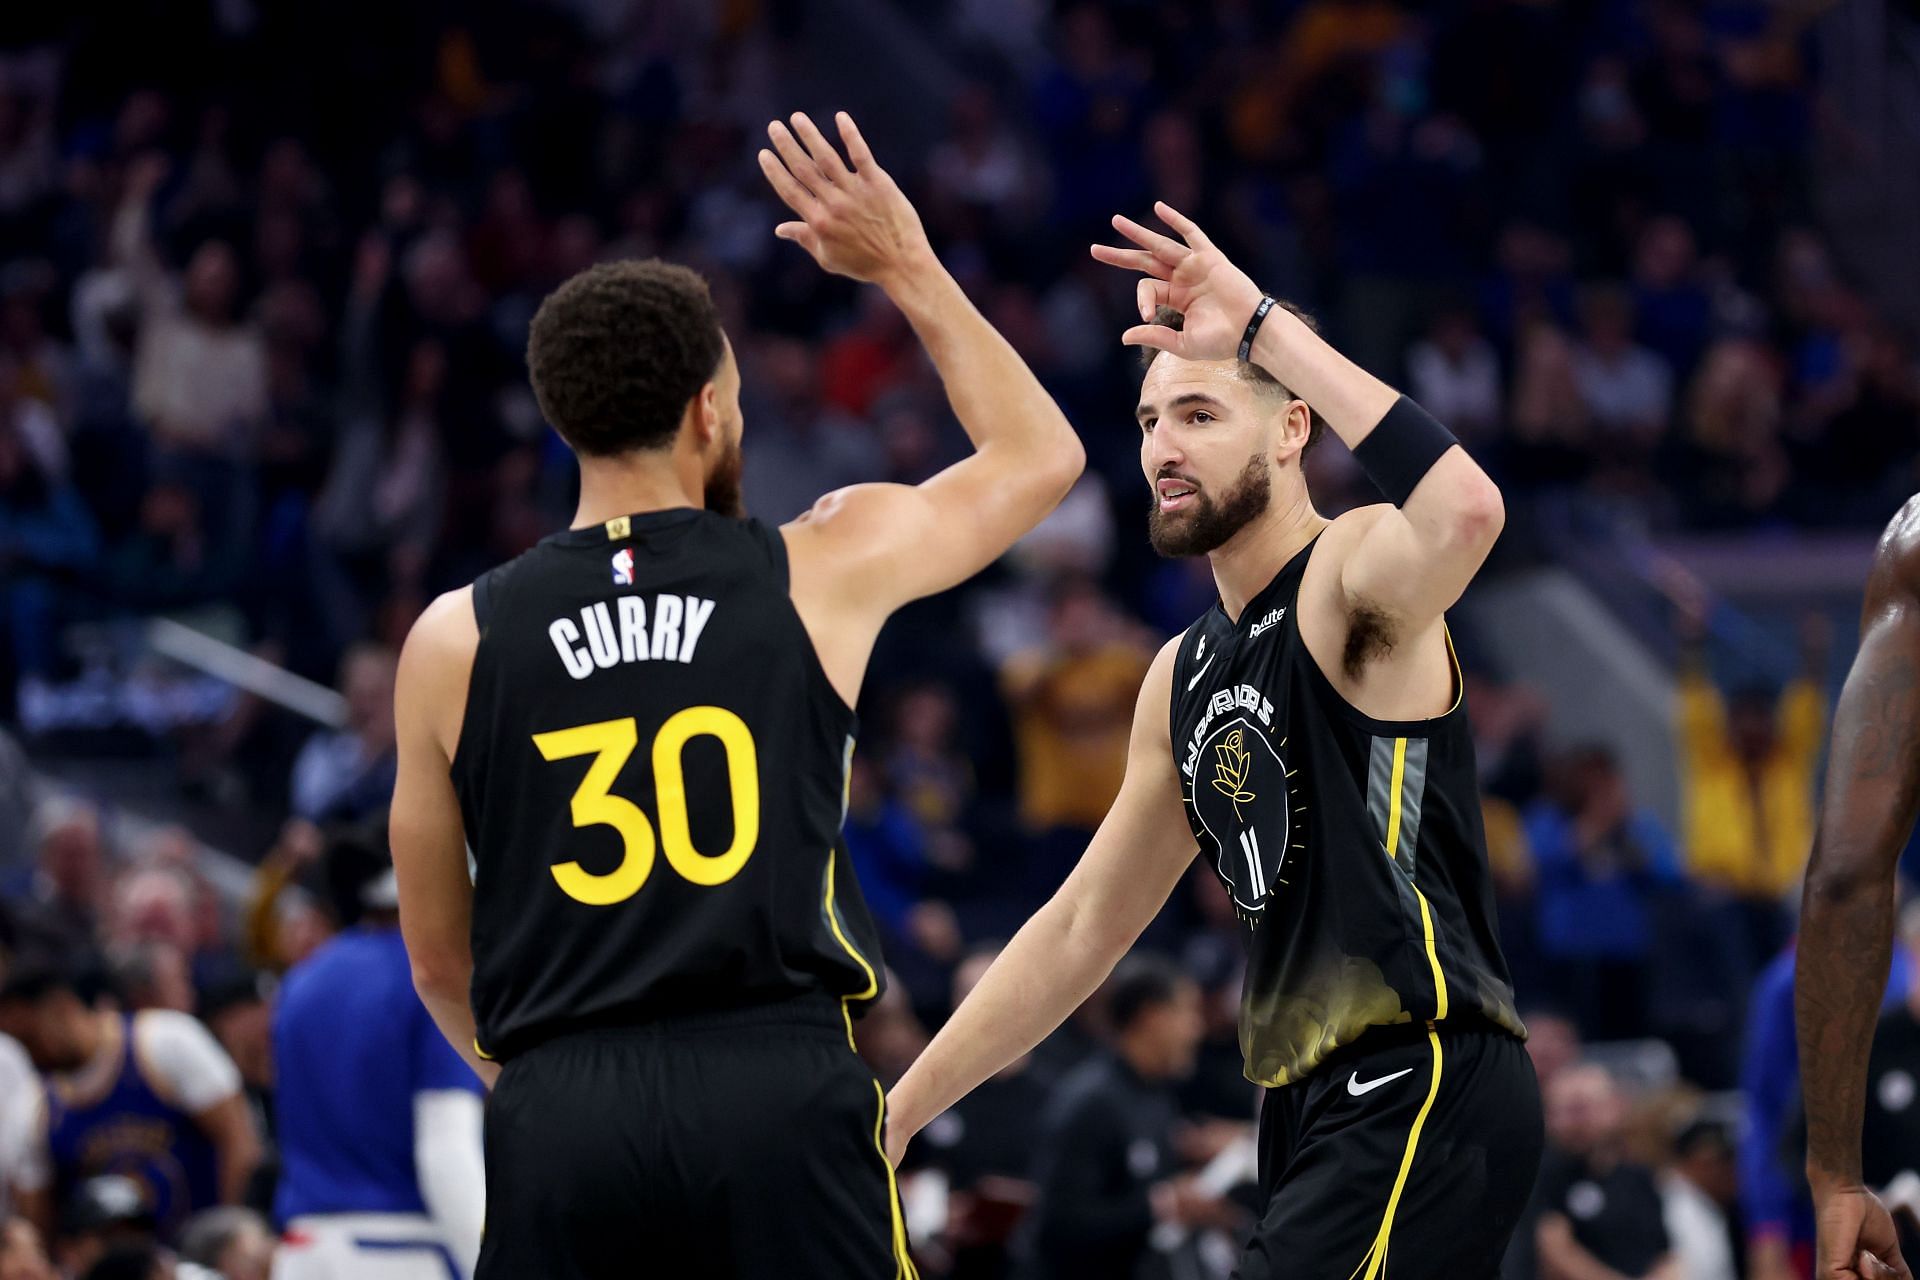 Fadeaway World on X: The Splash Brothers led the way vs. the Timberwolves  👀 Stephen Curry: 29 PTS 8 REB 6 AST 3 STL 6 3PM Klay Thompson: 23 PTS 5 REB